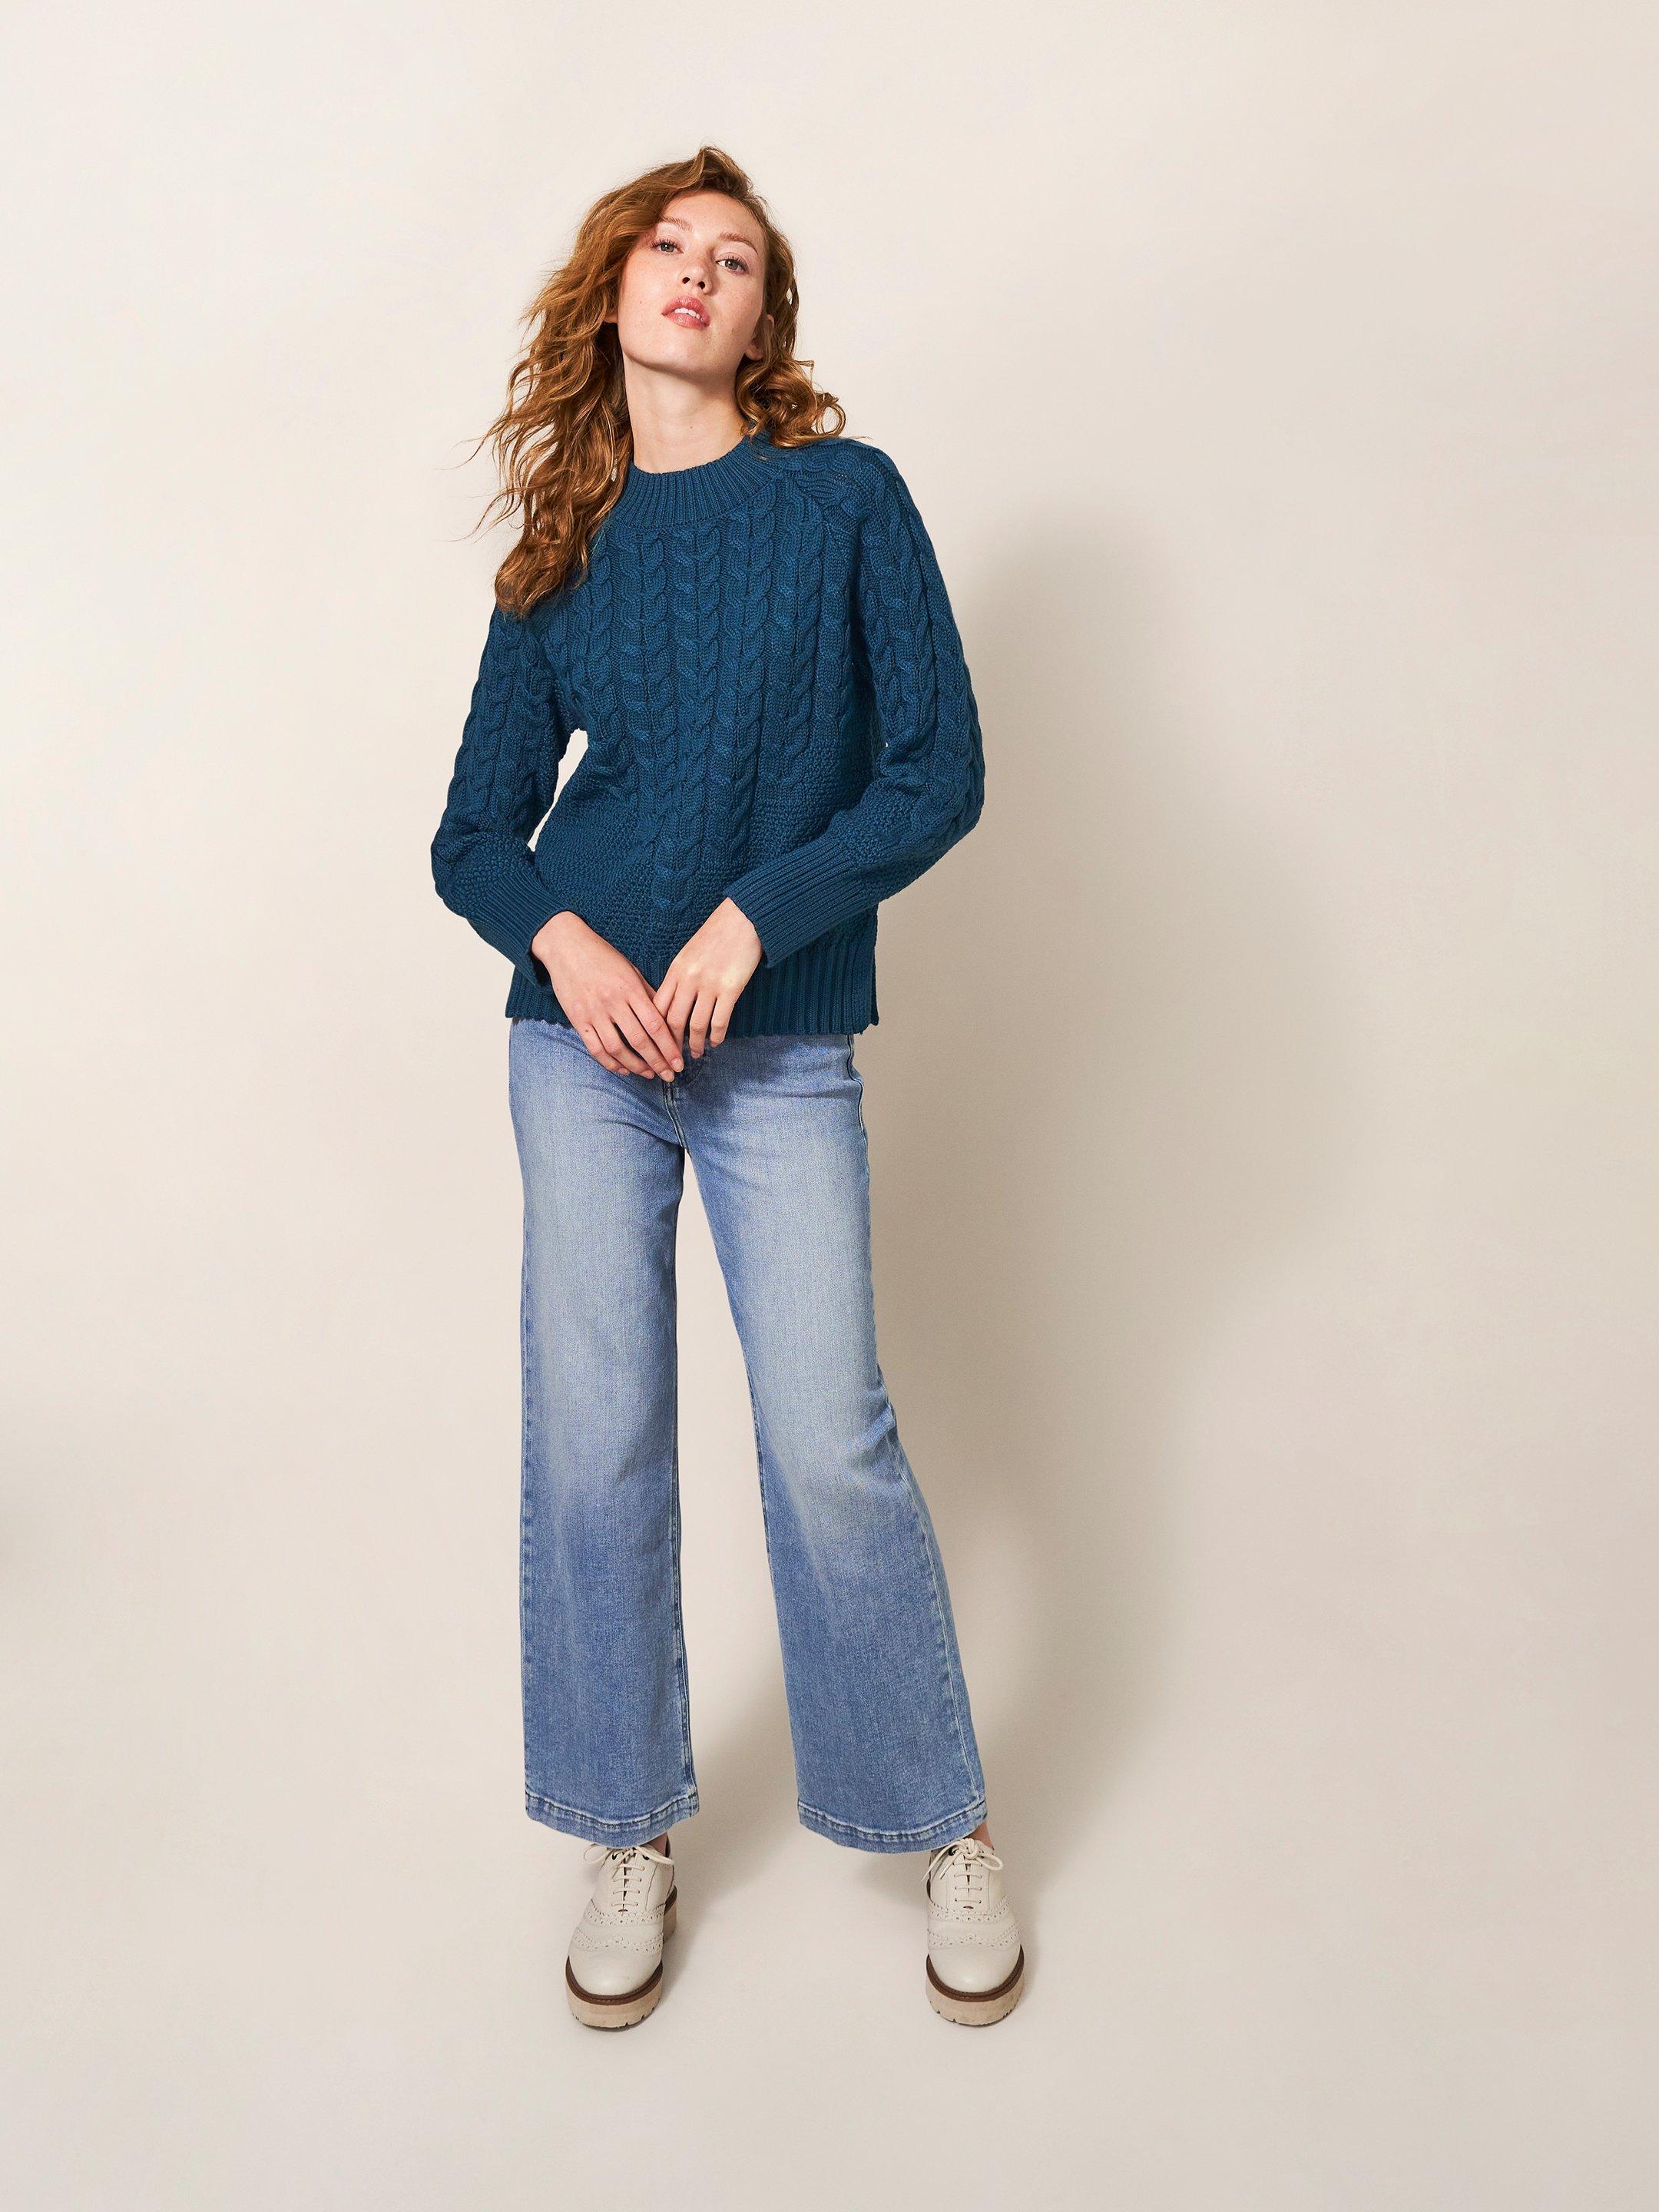 CABLE YOKE JUMPER in MID BLUE - MODEL FRONT